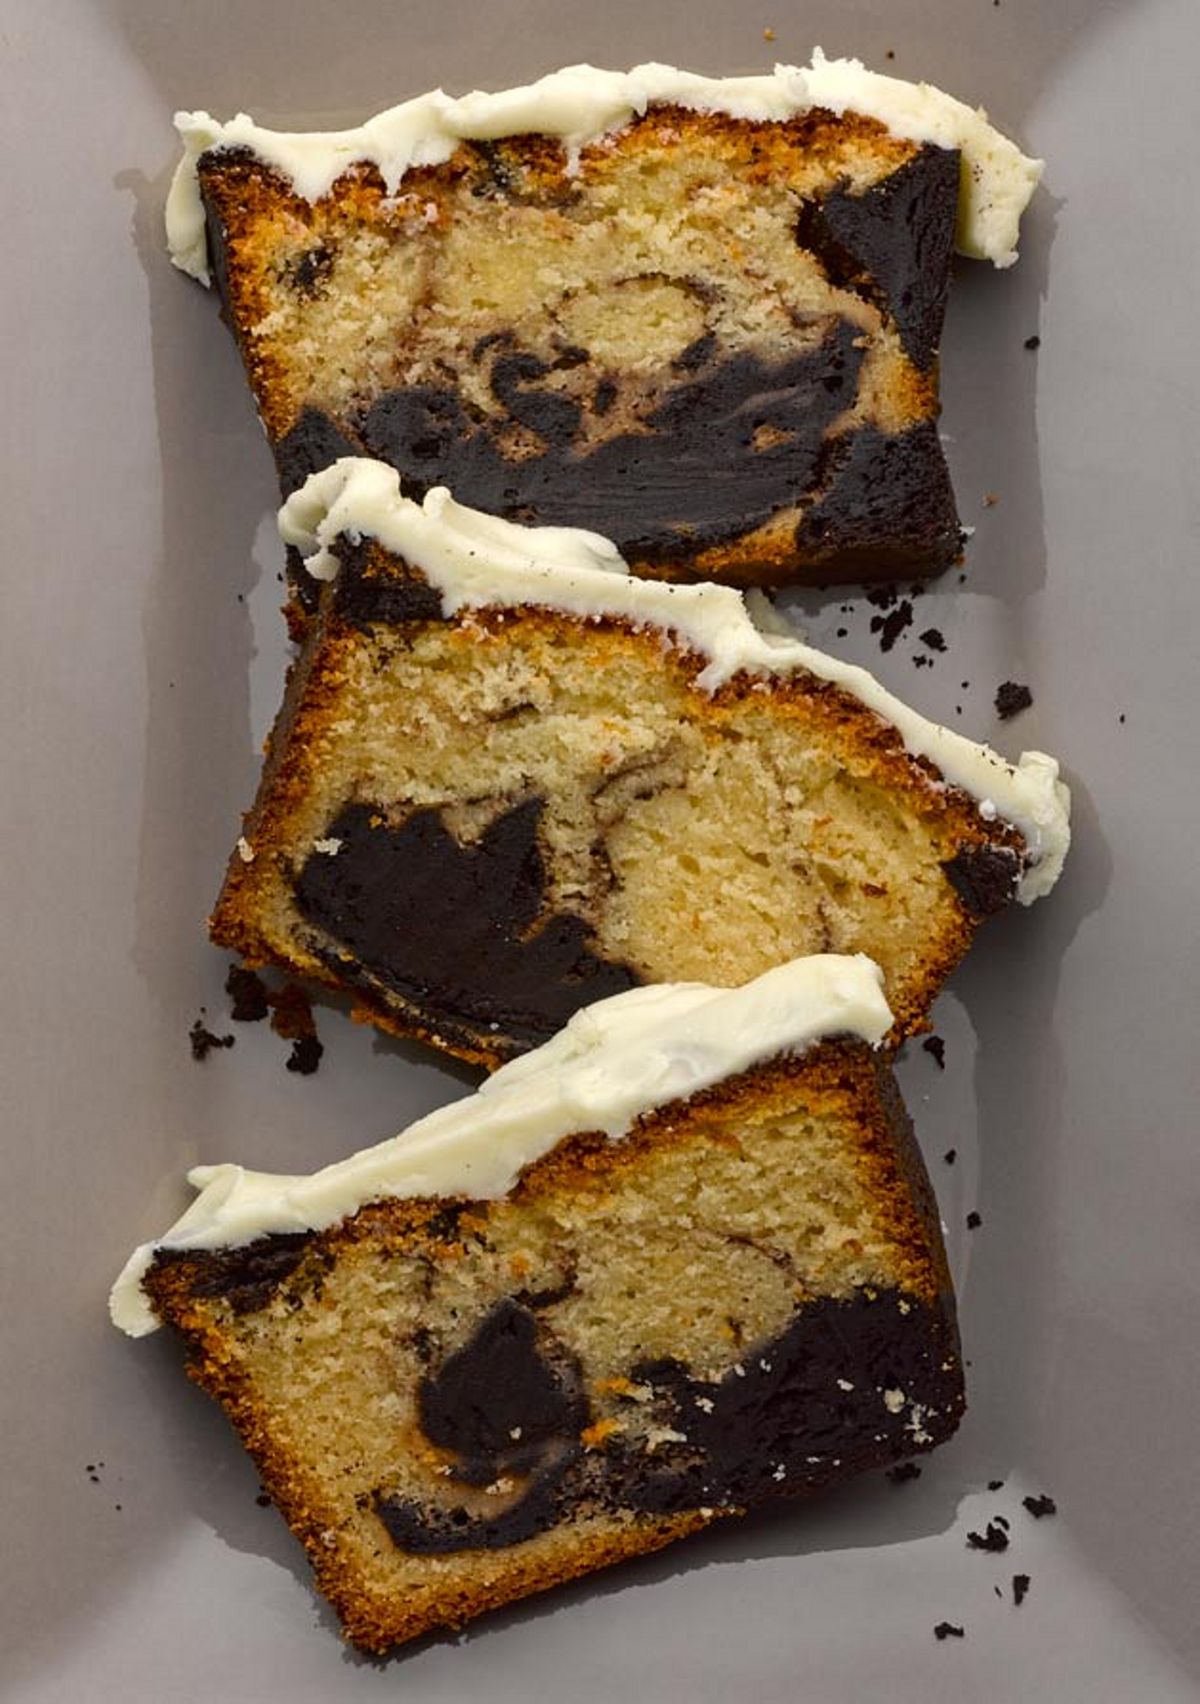 Chocolate Marble Cake with White Chocolate Icing